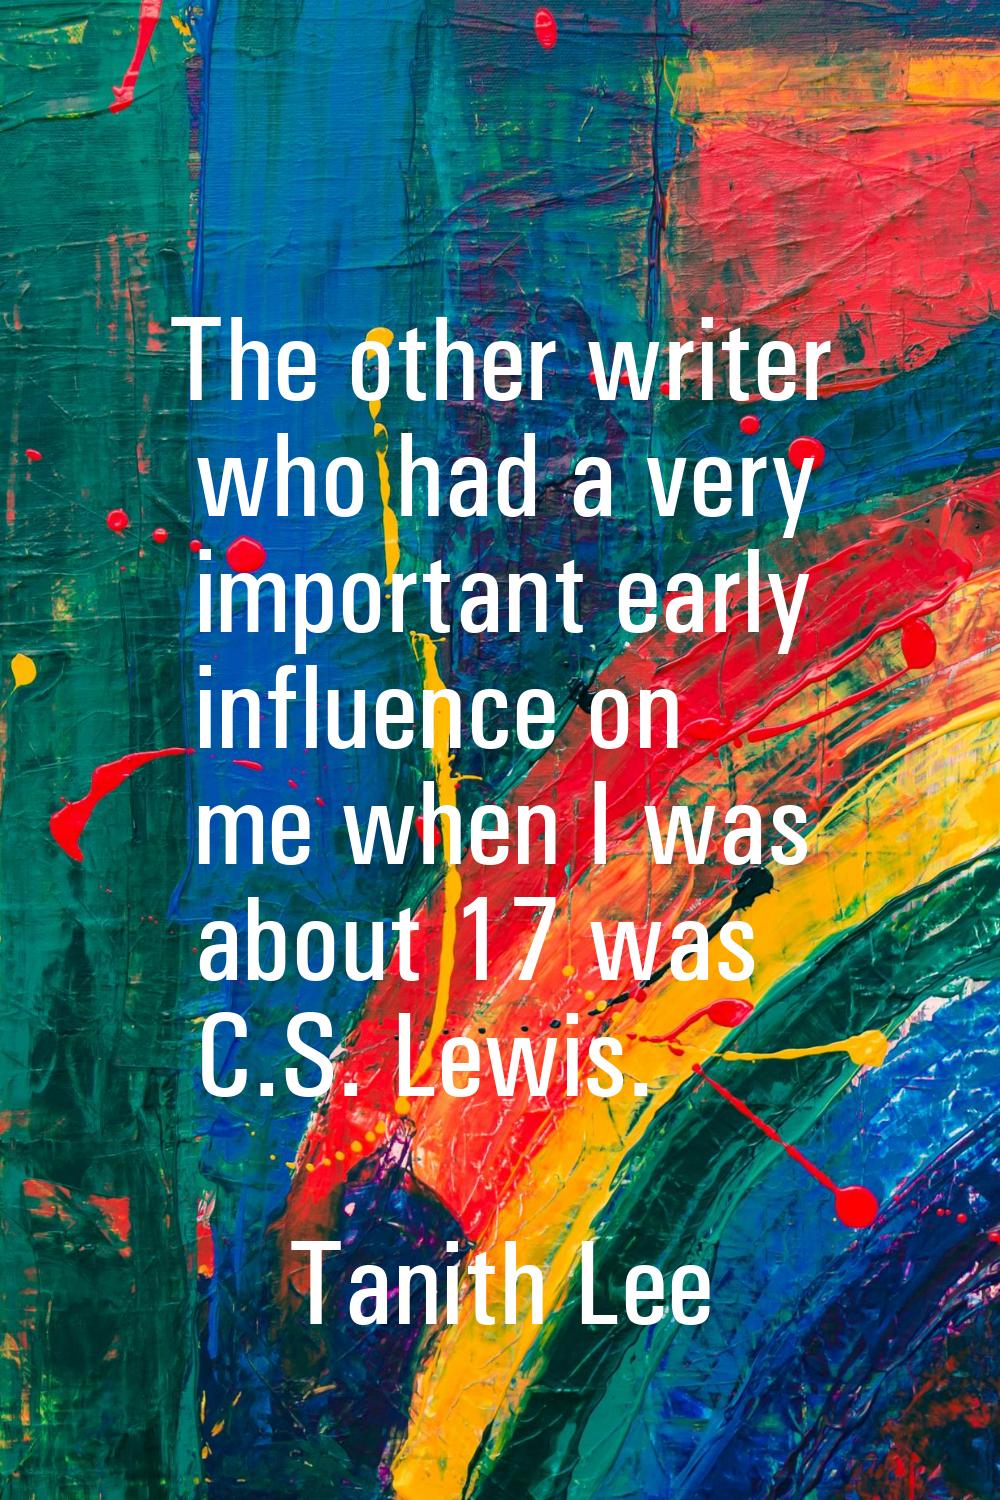 The other writer who had a very important early influence on me when I was about 17 was C.S. Lewis.